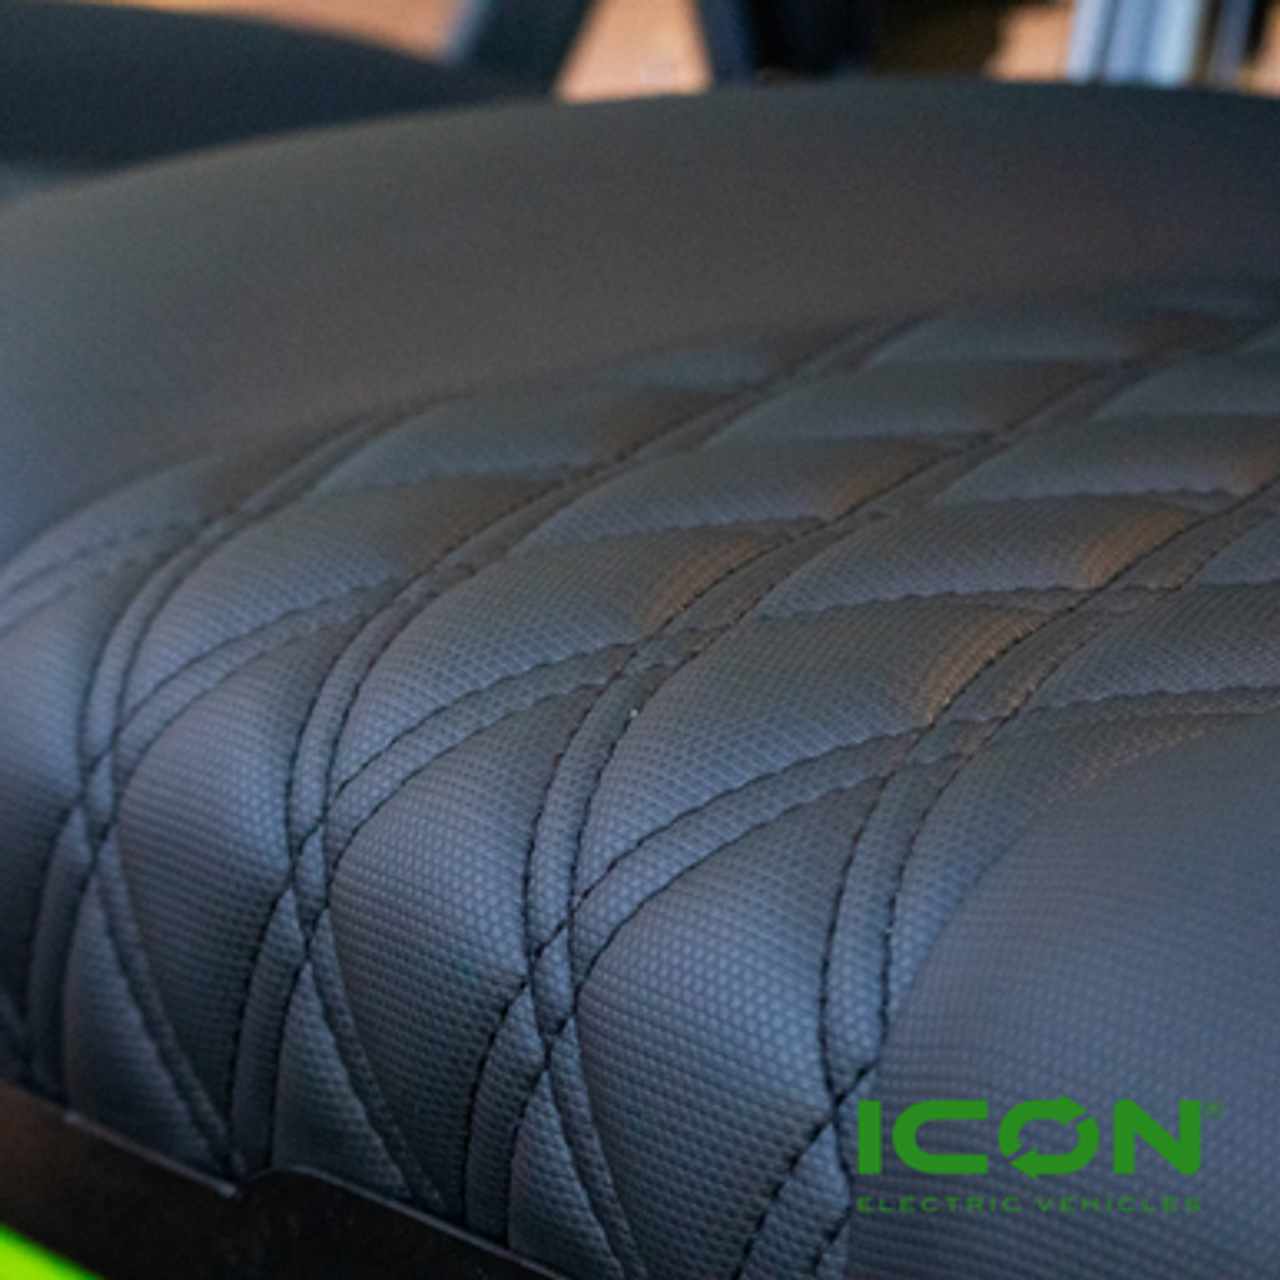 ICON Black Comfort Custom Seat Cool Touch Base with Double Diamond Pattern and Black Stitching, STC-BLKDDBLK-IC-COMF